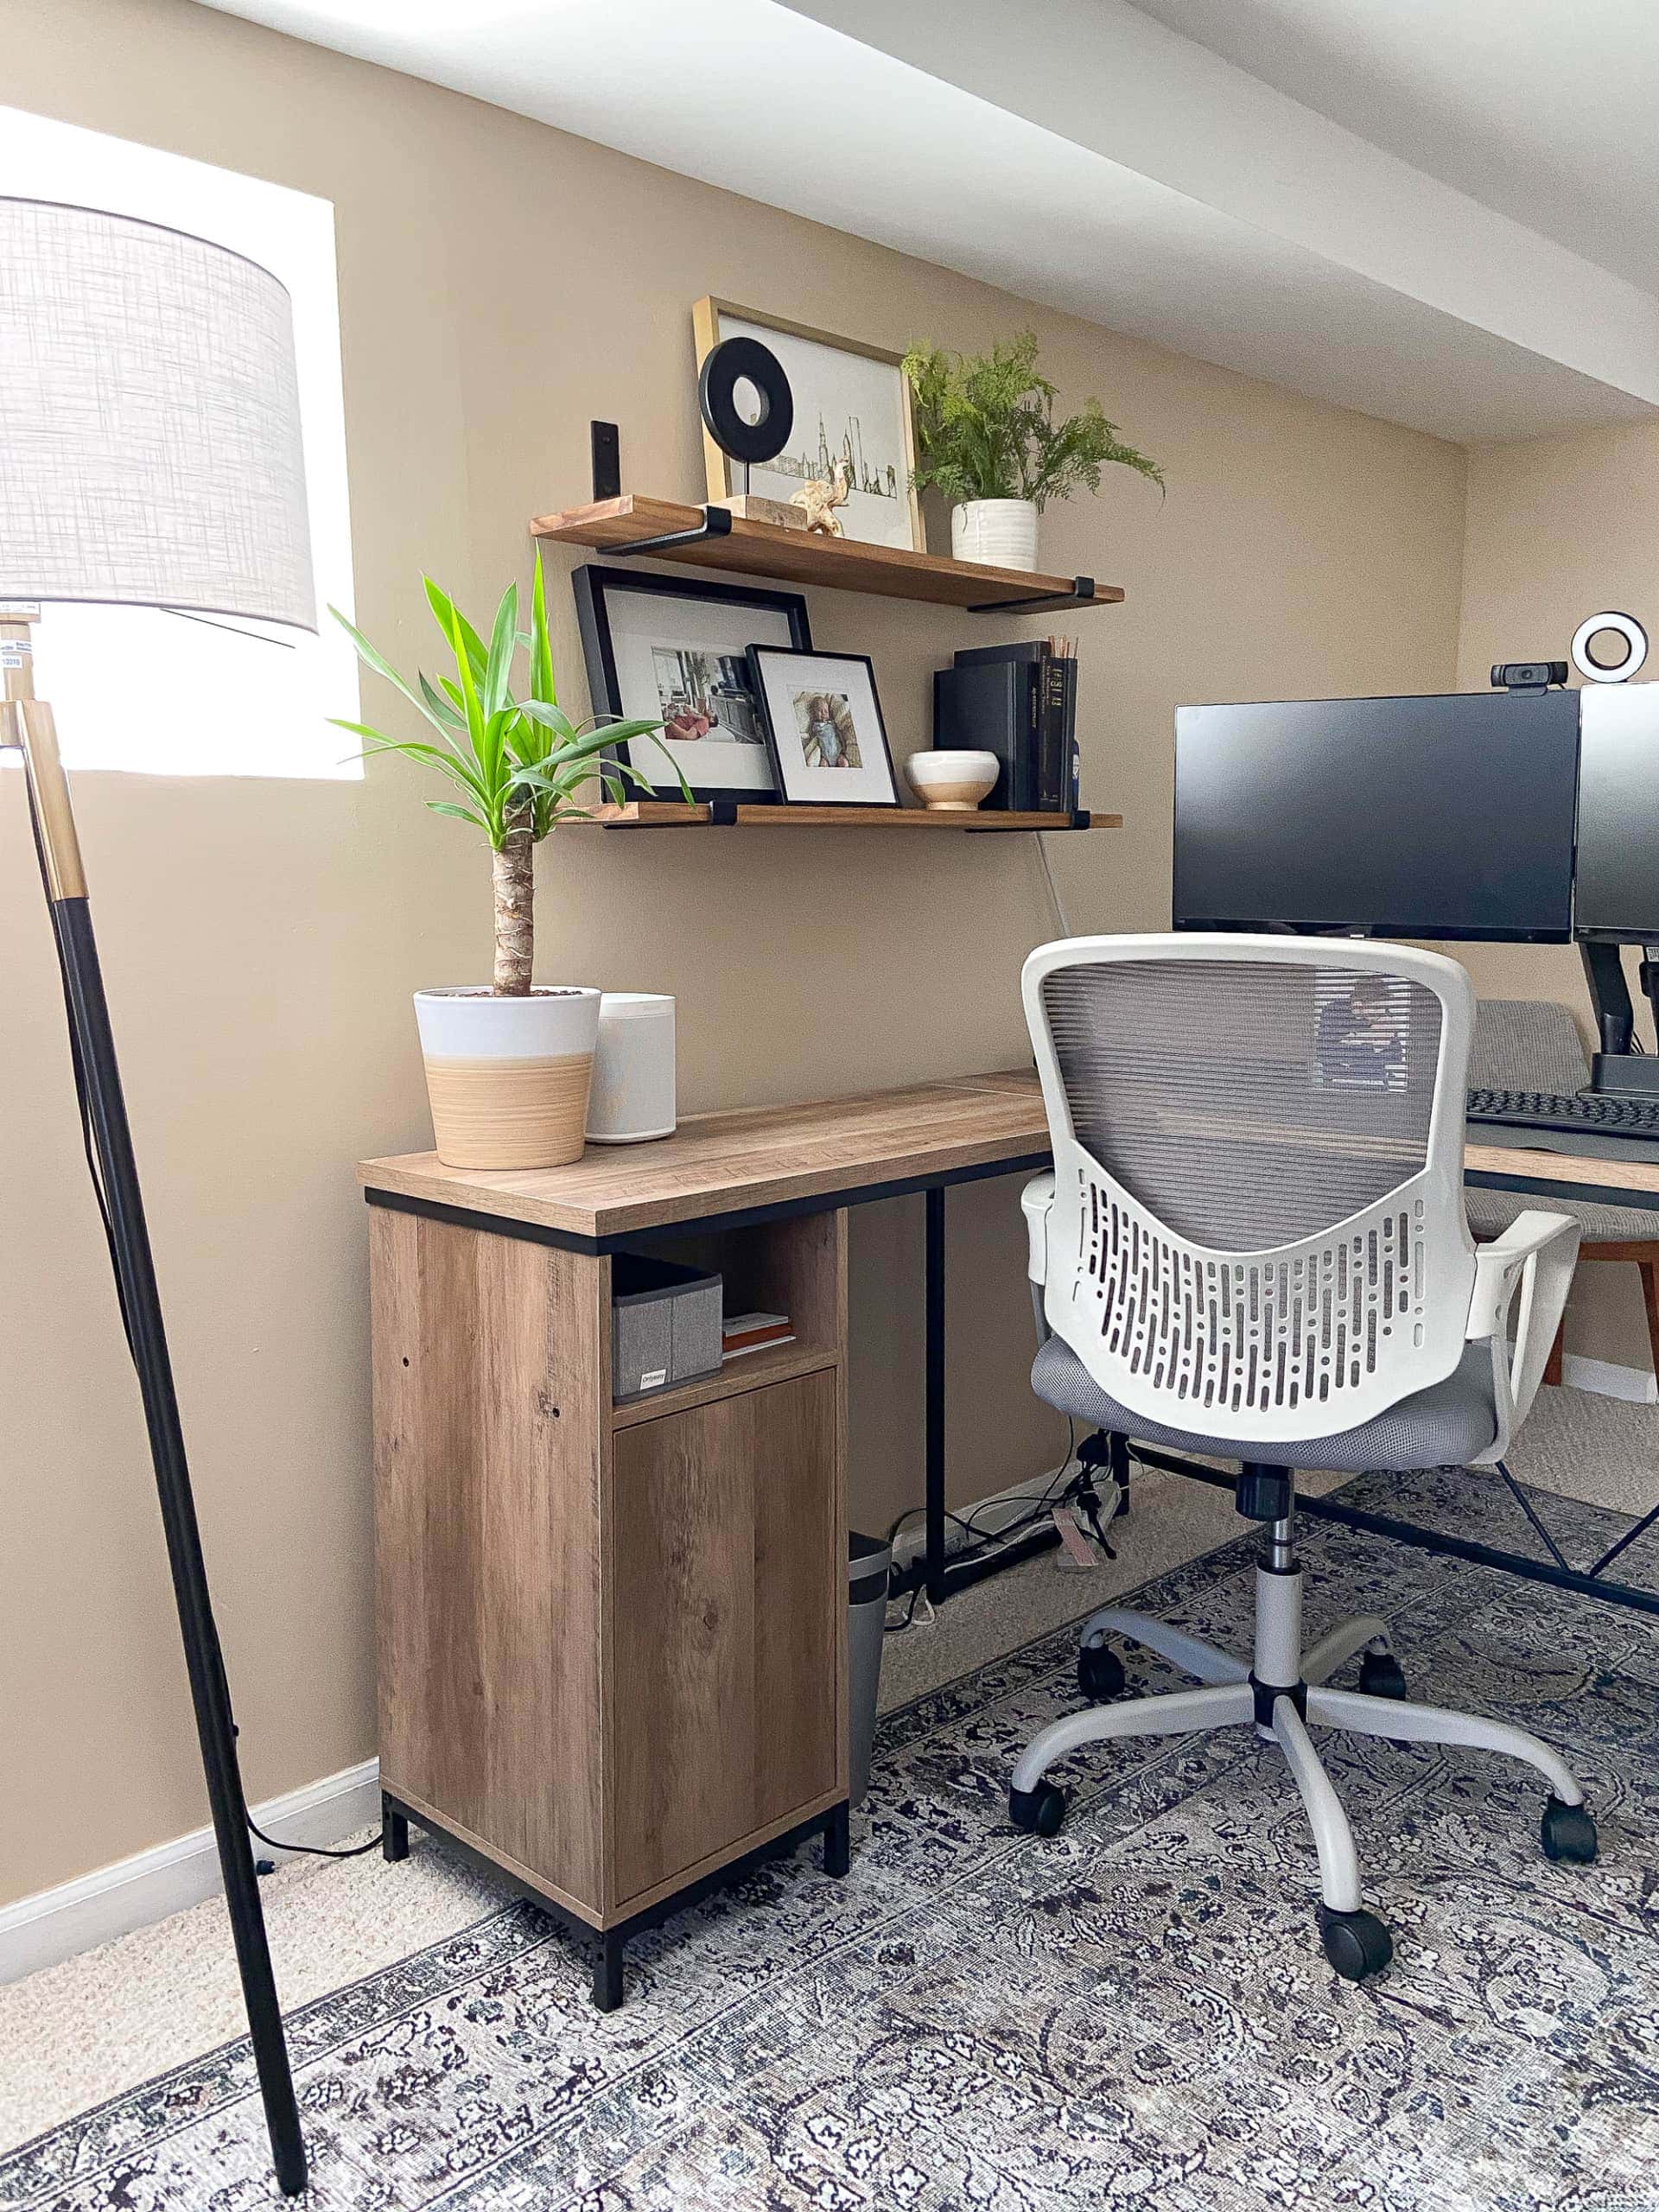 Tips to style simple wood shelves for your home office